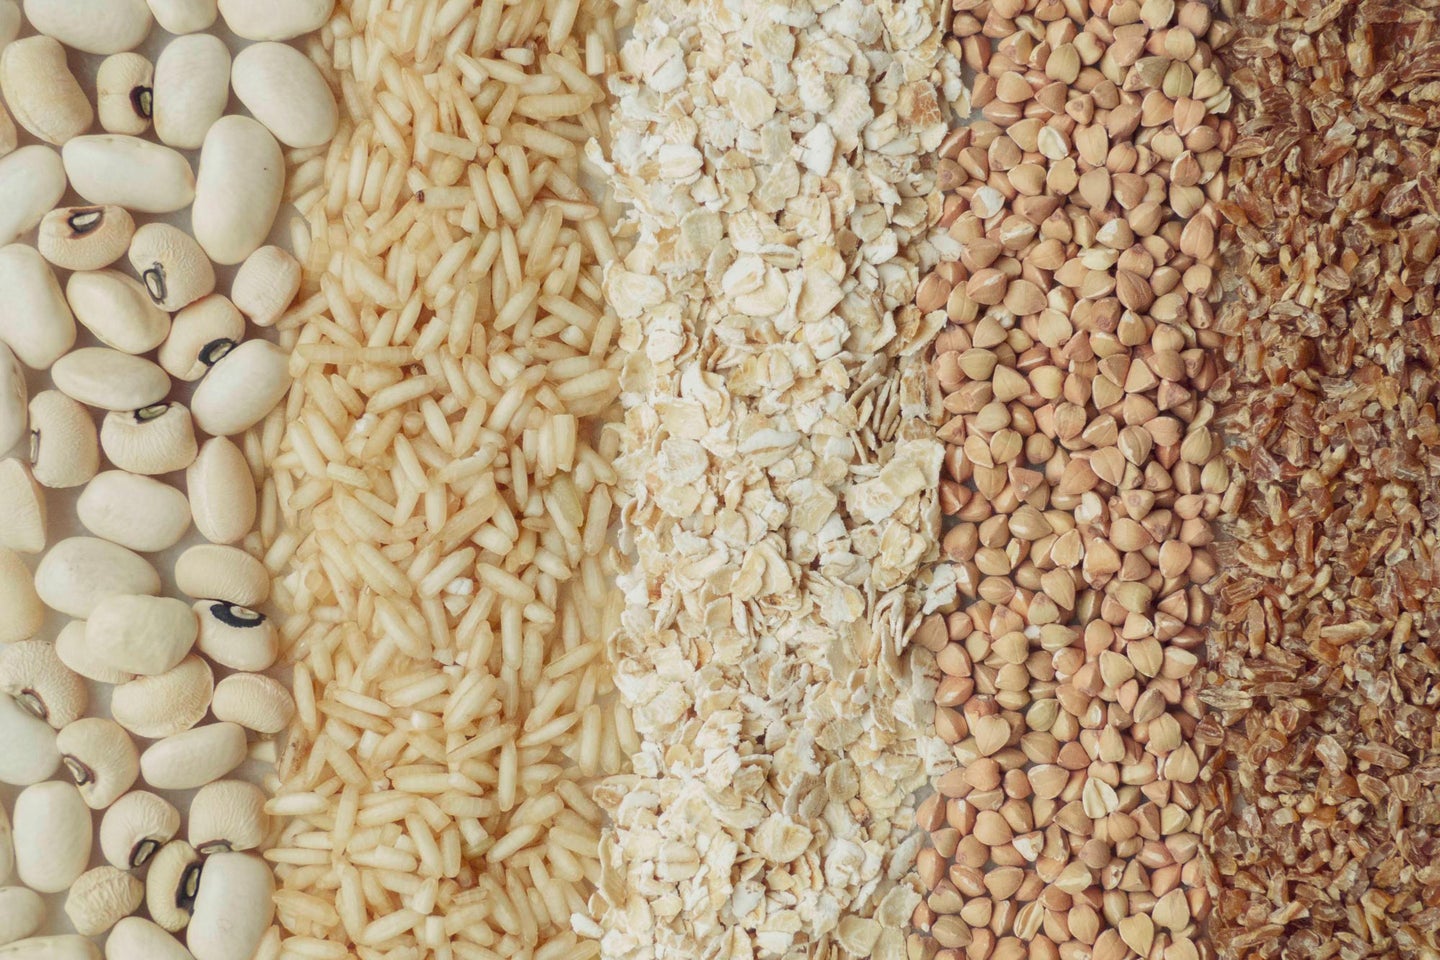 legumes and whole grains